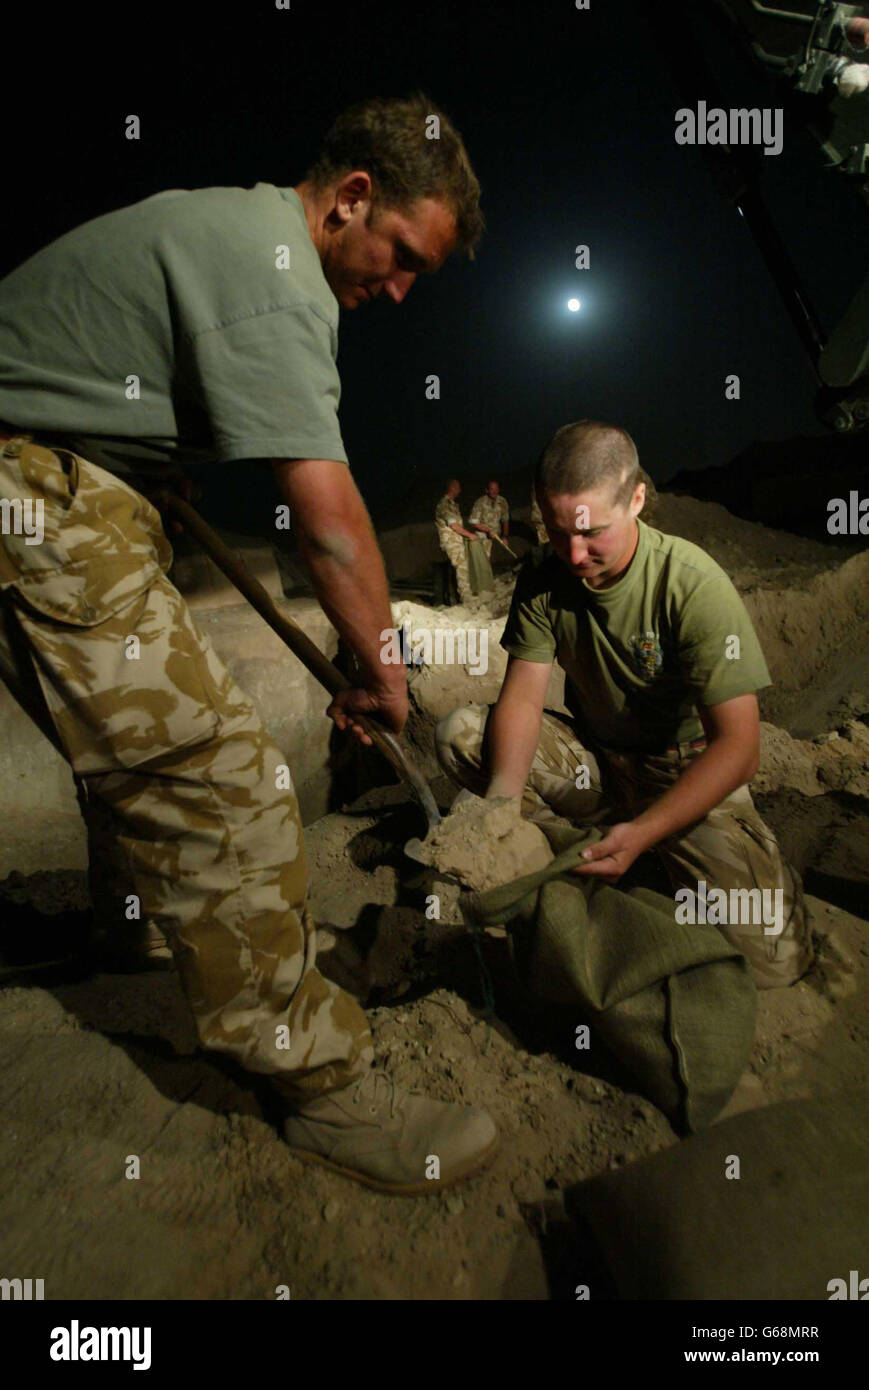 With the moonlight to help them men of the Royal Engineers fill sandbags in the early hours of British time, to pile around bunkers designed to protect British forces from a rocket attack. Stock Photo